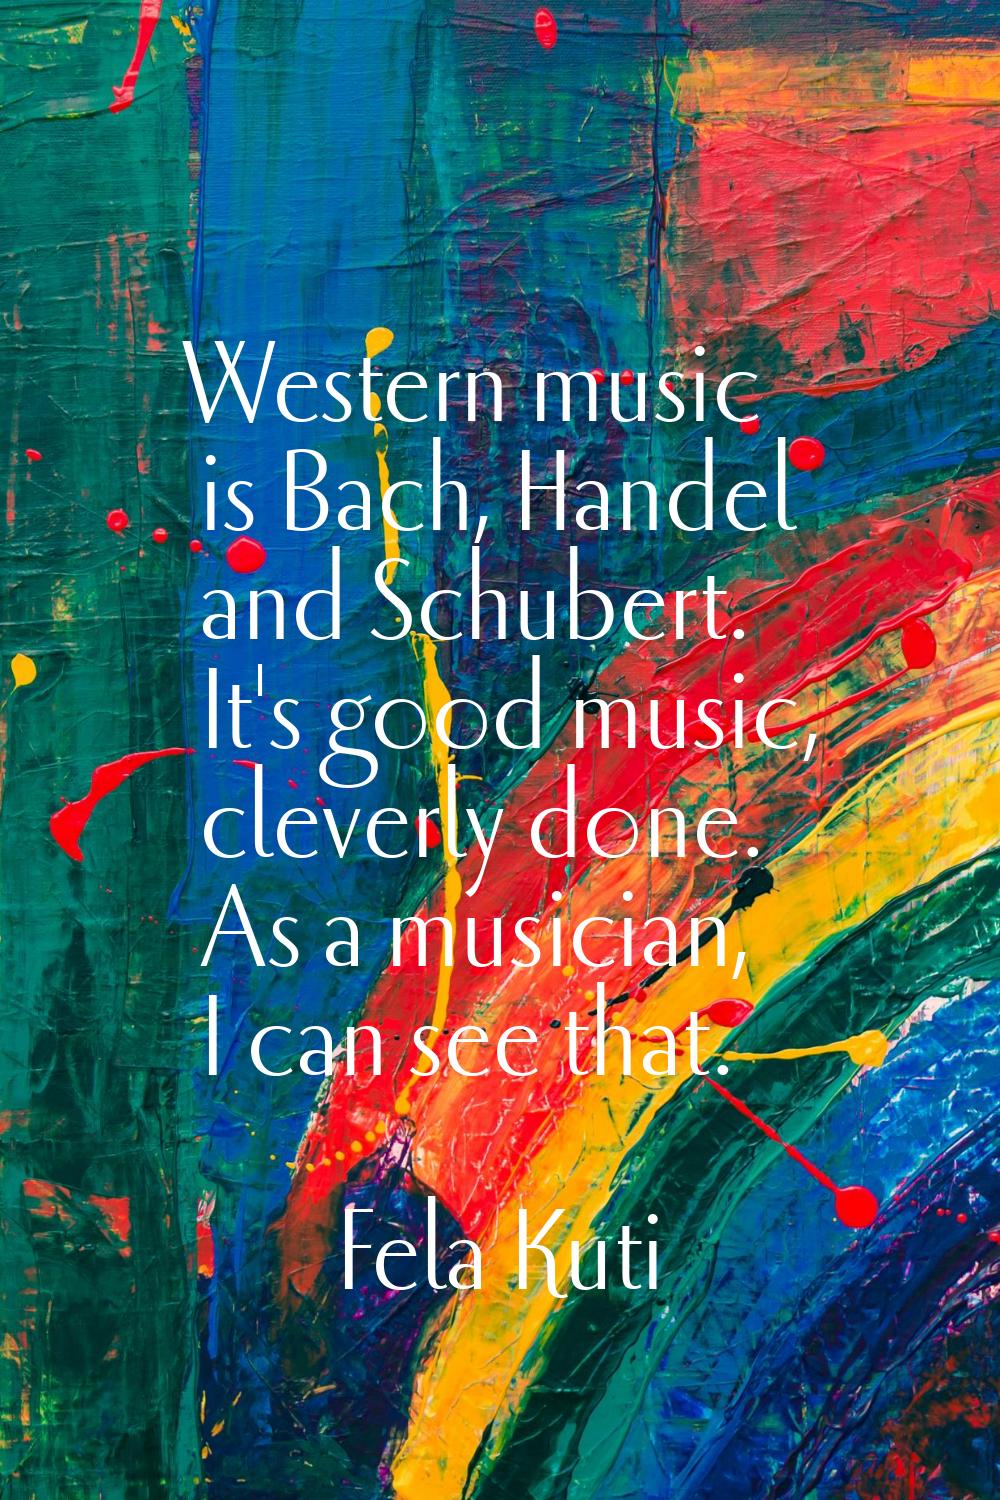 Western music is Bach, Handel and Schubert. It's good music, cleverly done. As a musician, I can se